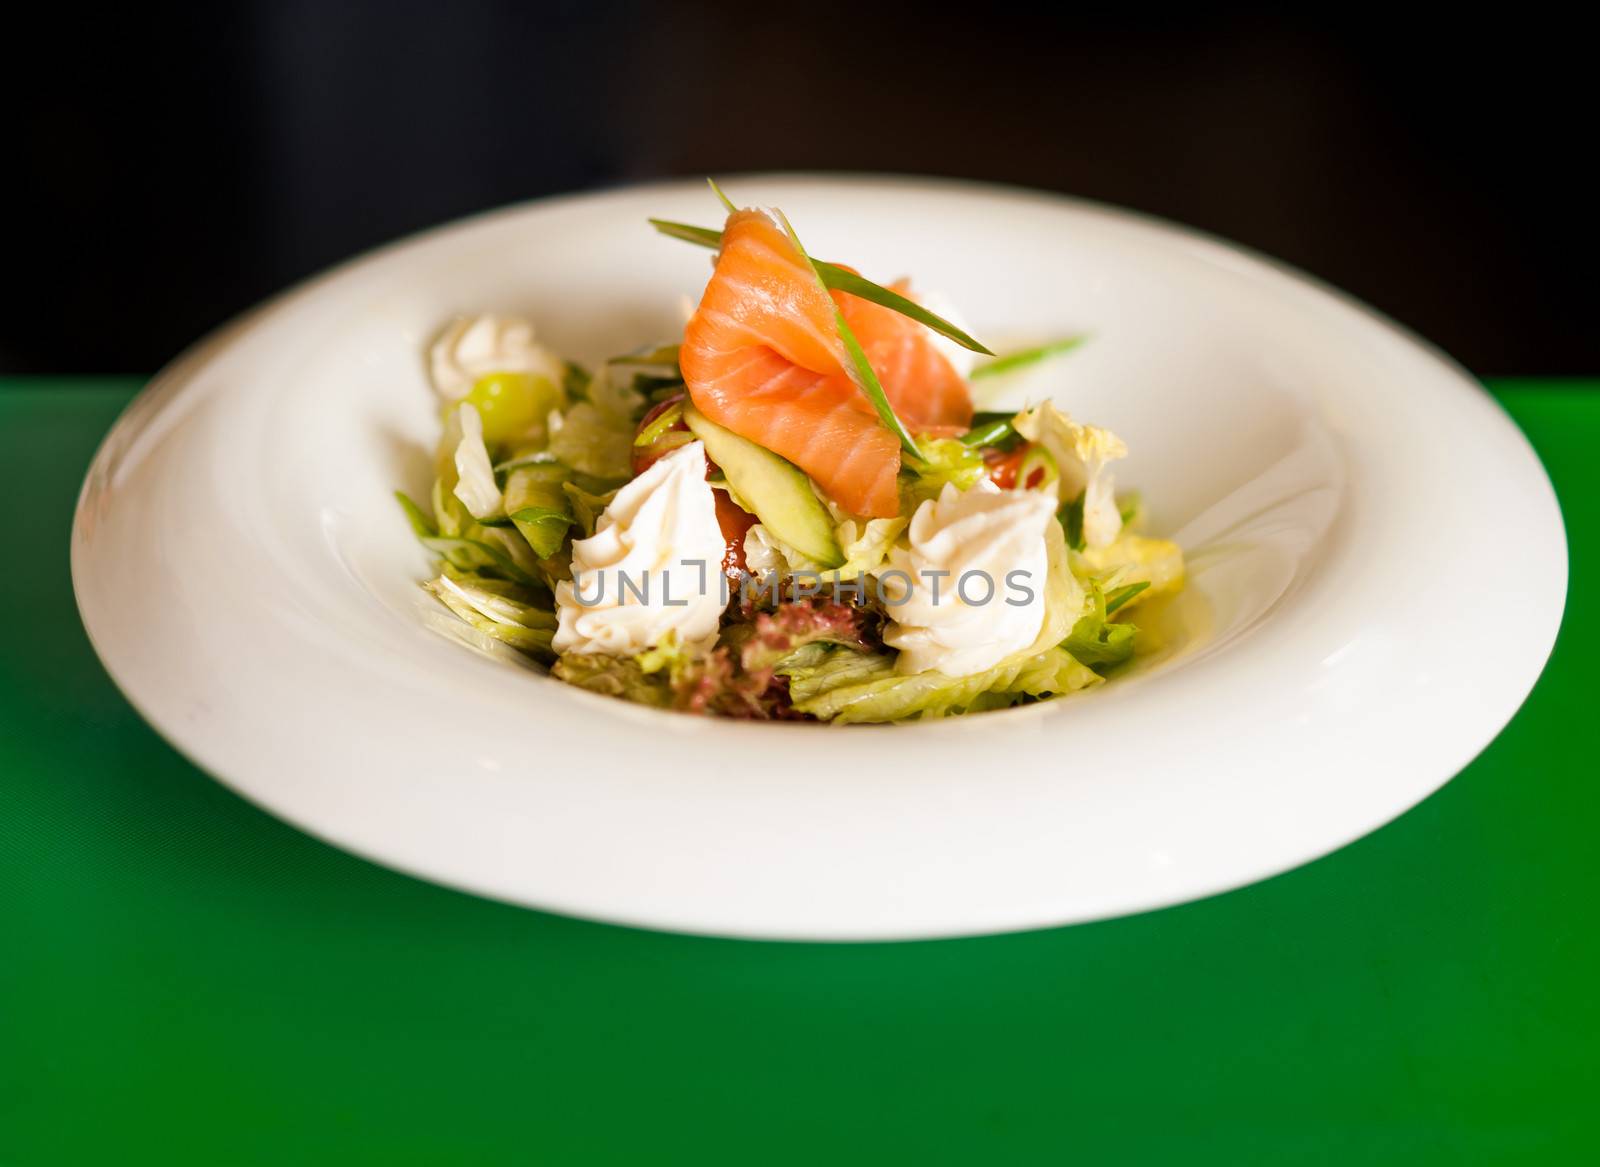 Salad - Smoked salmon with vegetables, served with cream